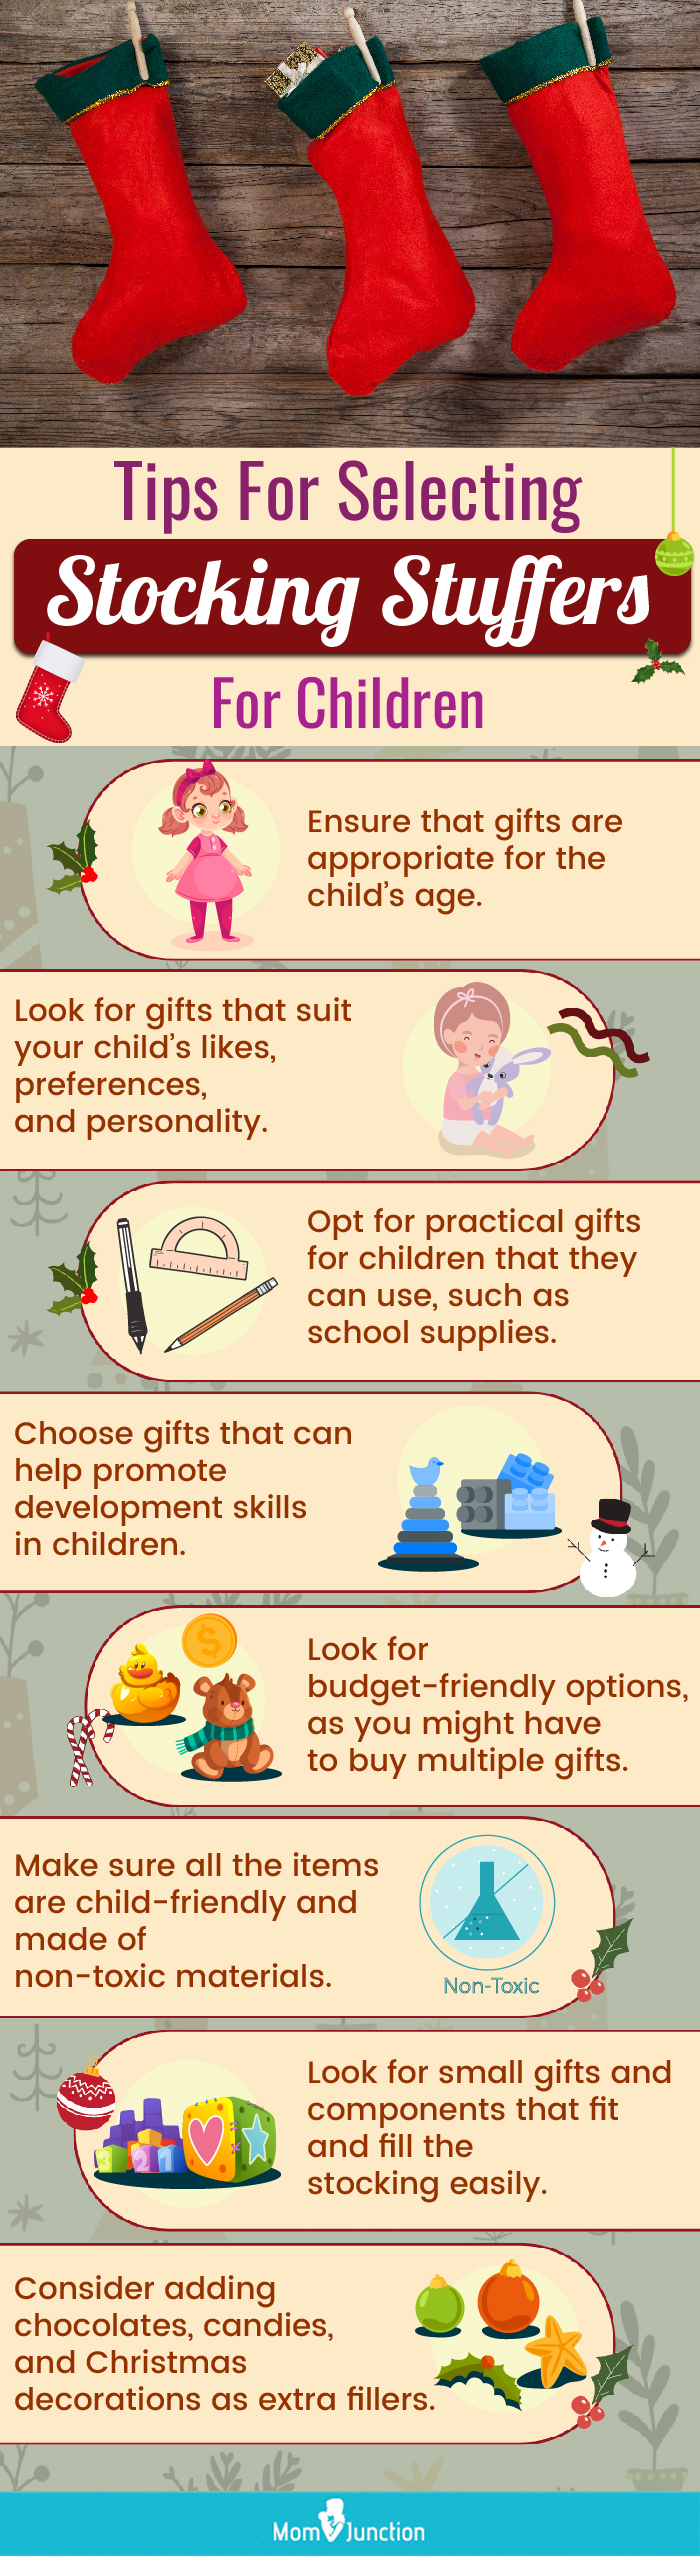 Tips For Selecting Stocking Stuffers For Children (infographic)